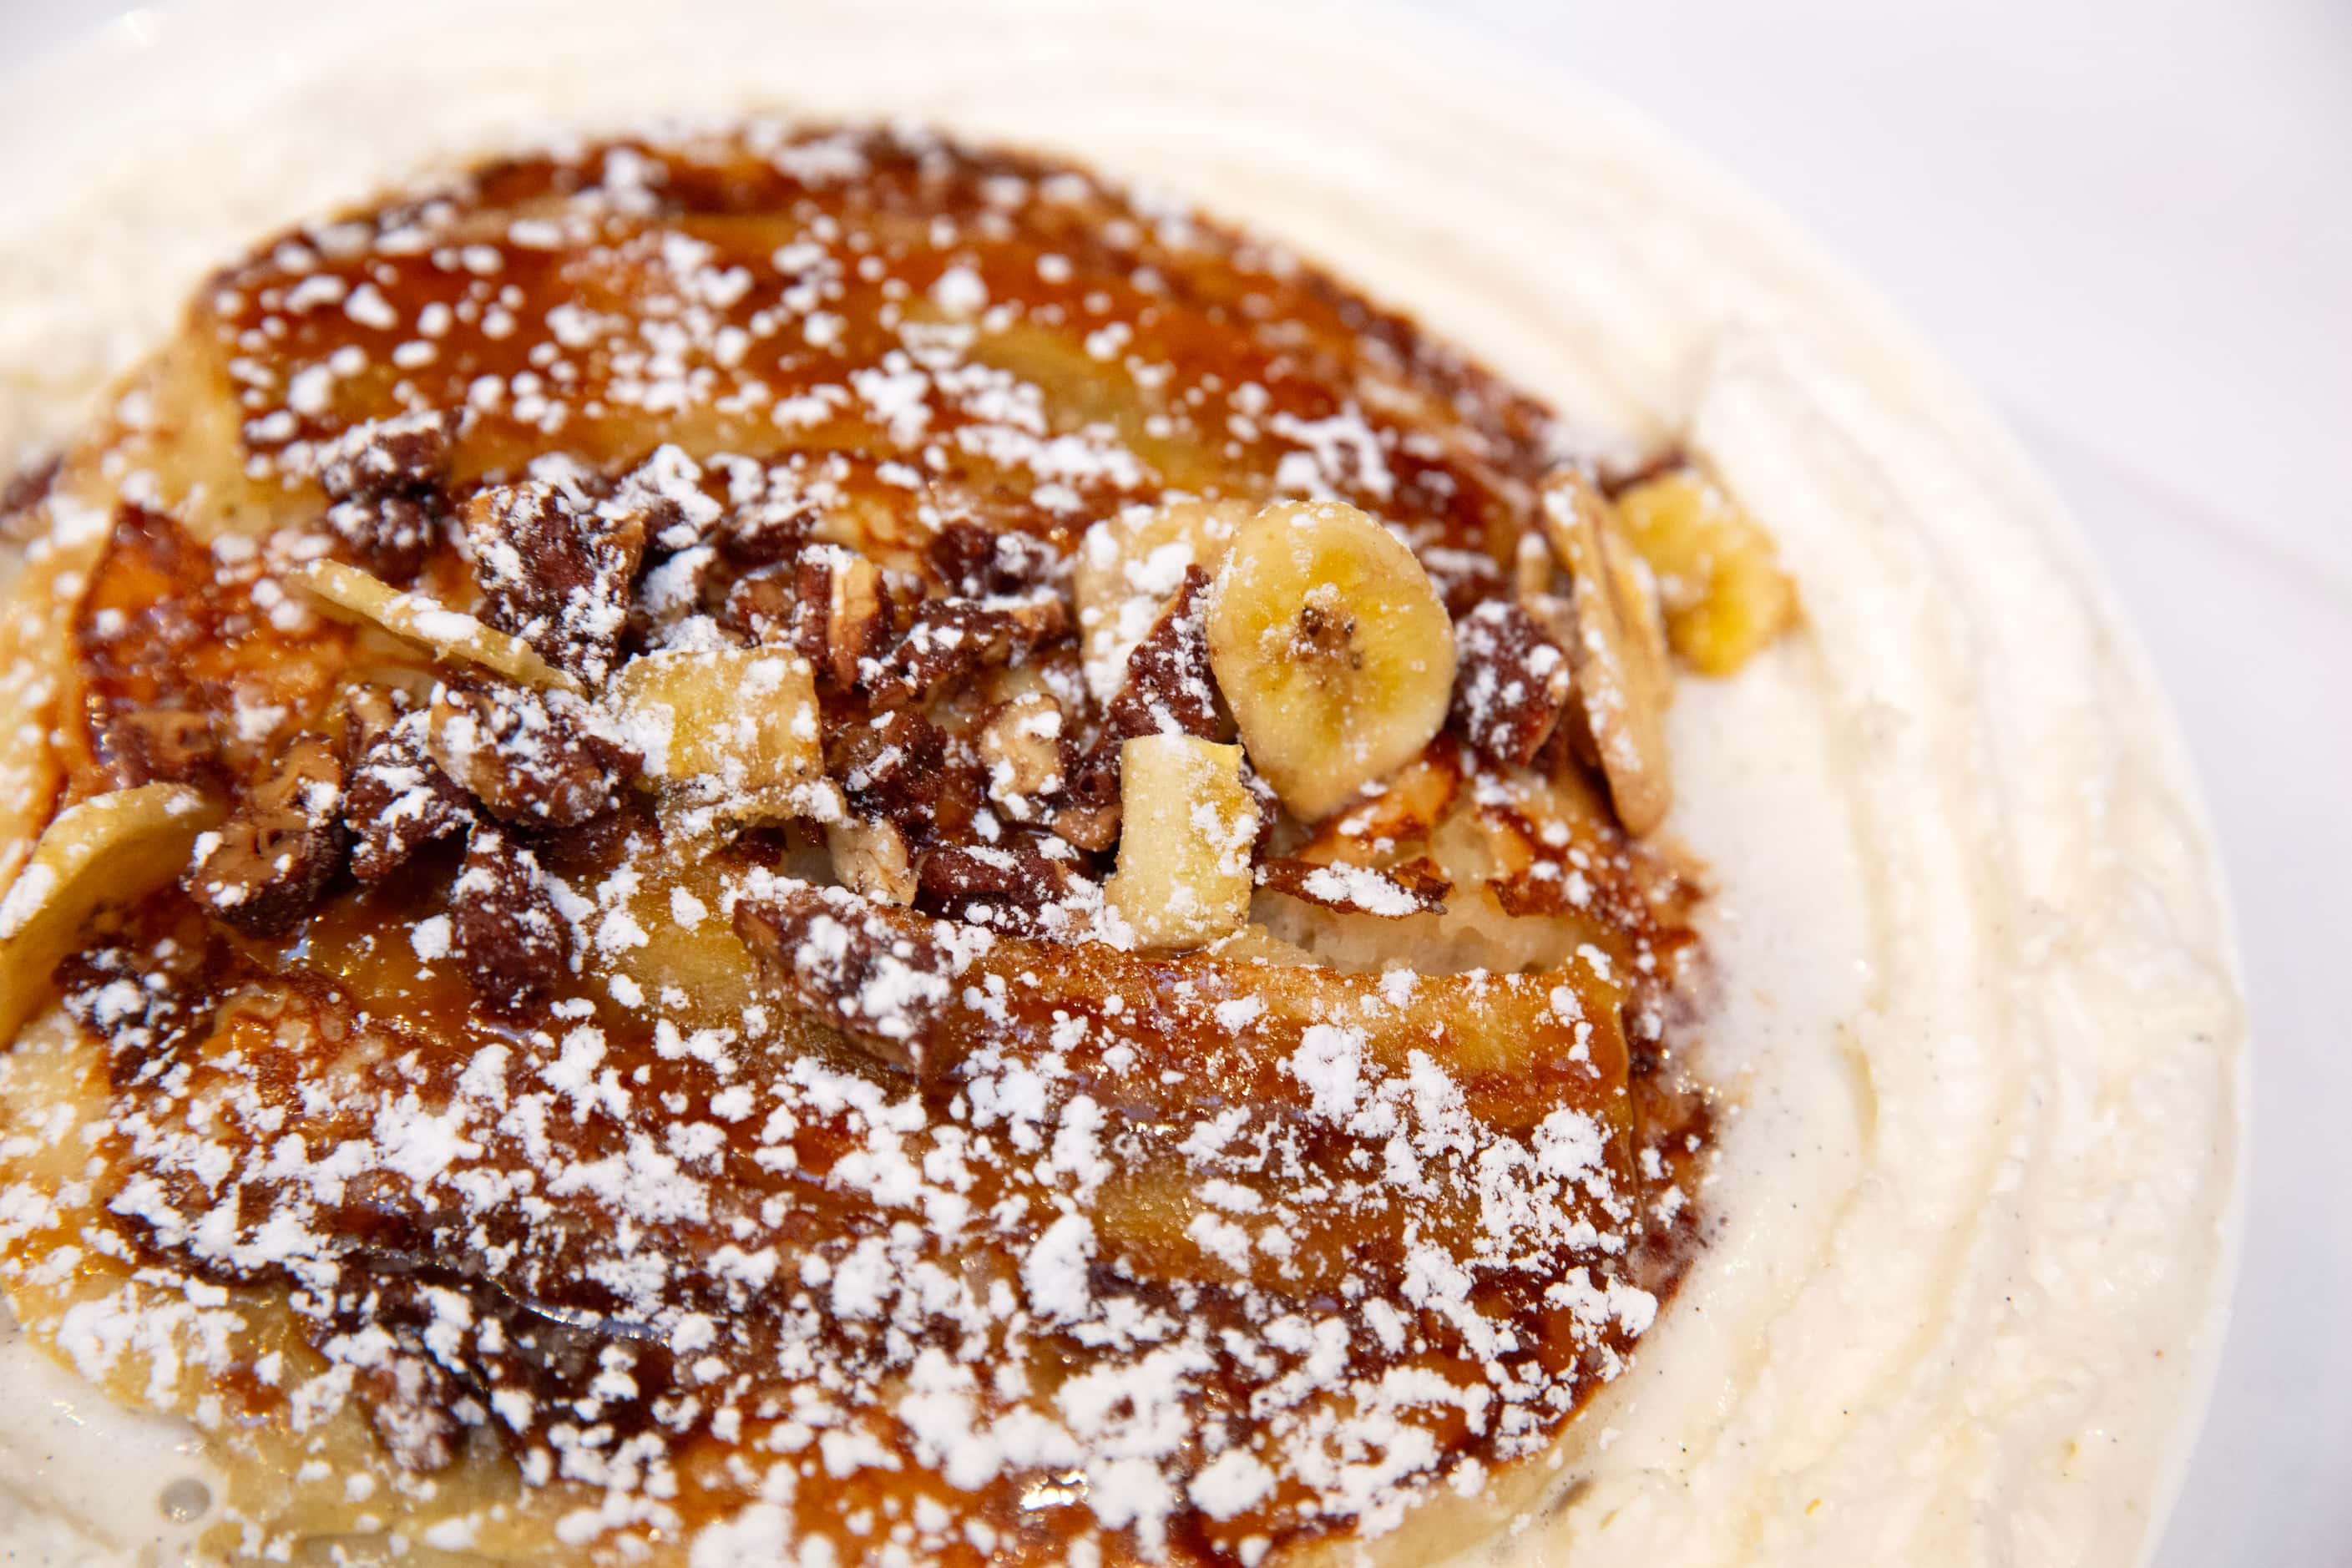 Bananas foster pancakes are served at breakfasttime at Little Daisy in Dallas' Thompson hotel.